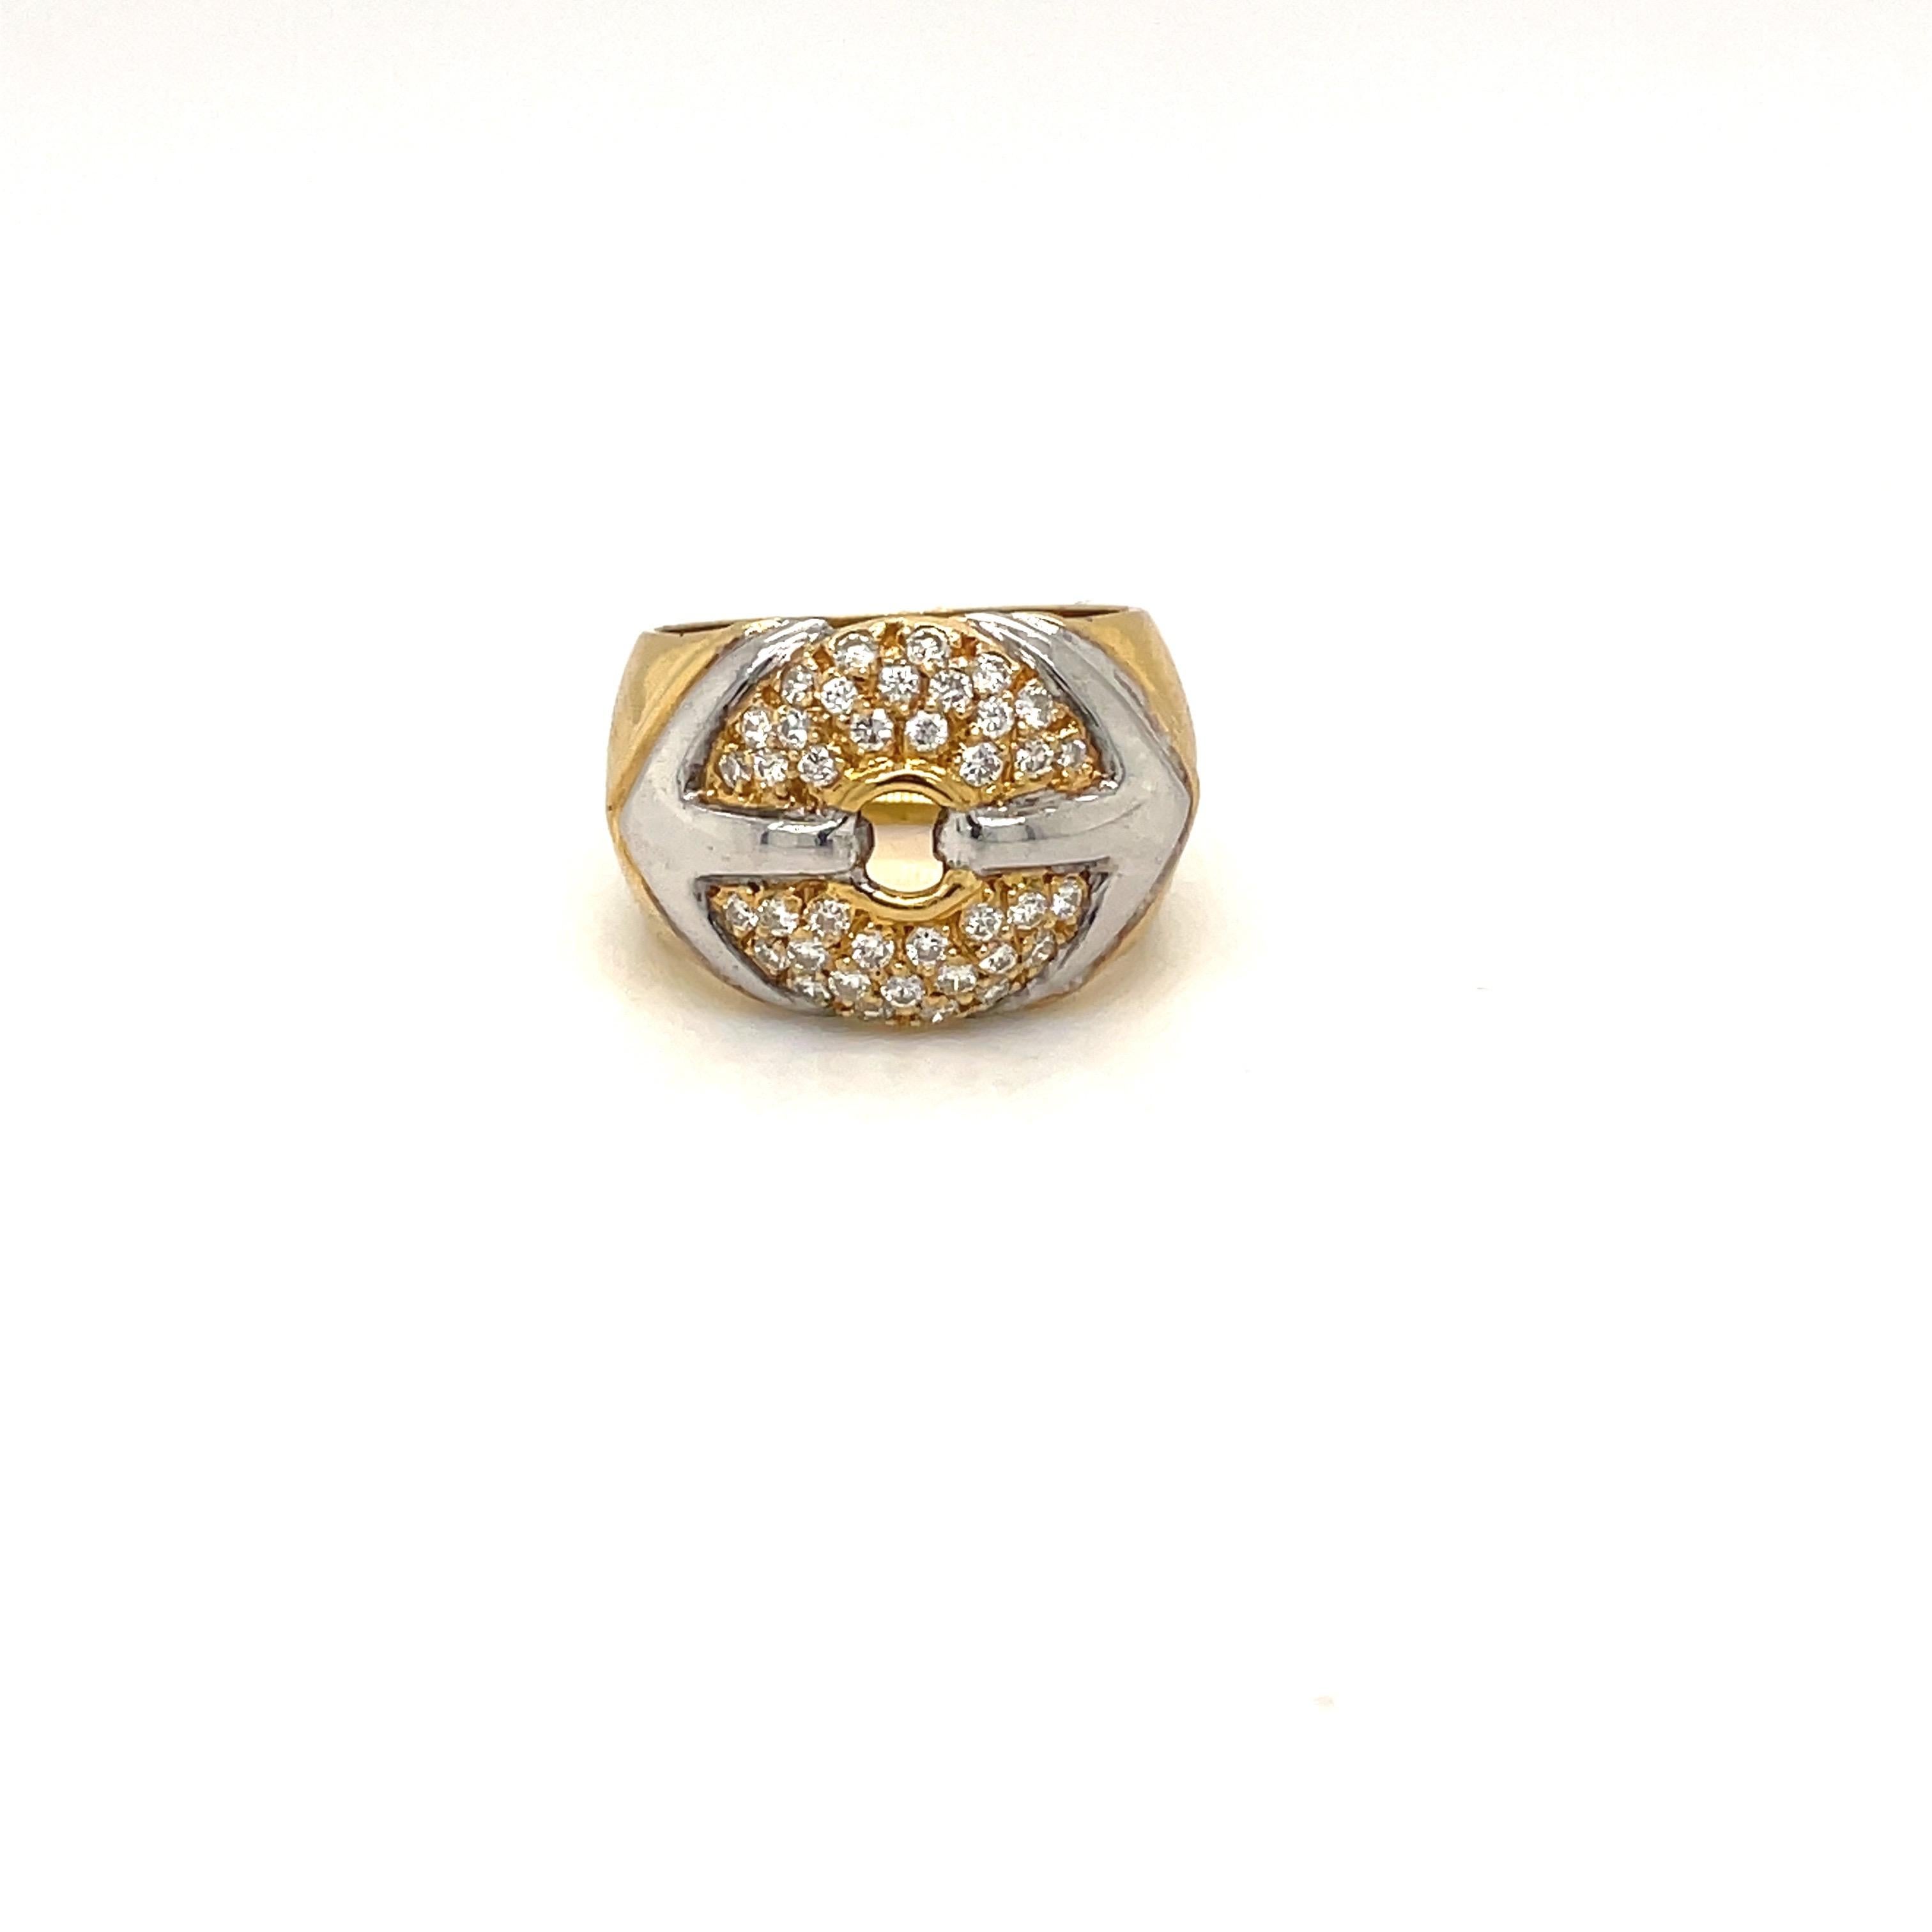 18 karat yellow gold band style ring. The center of the ring is set with round brilliant diamonds in a circular motif. The center motif is accented with white gold.
Total diamond weight 0.63 carat
Stamped 750 LEB
Ring size 6
